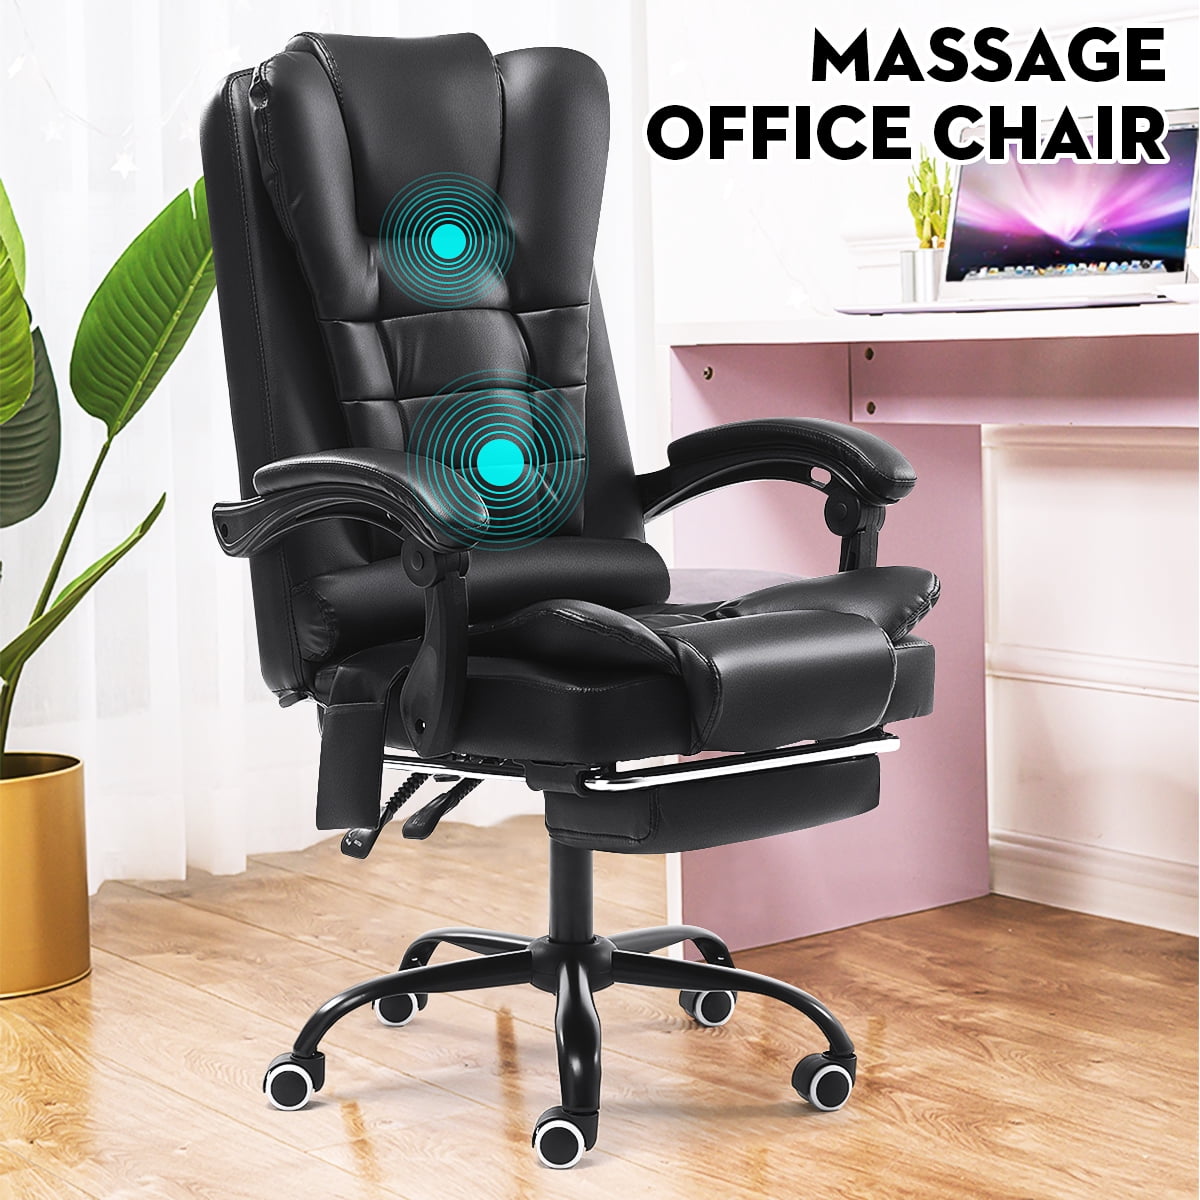 Details about   Sibosen Gaming Chair Office Chair Computer Chair High Back PU Leather Desk Chair 